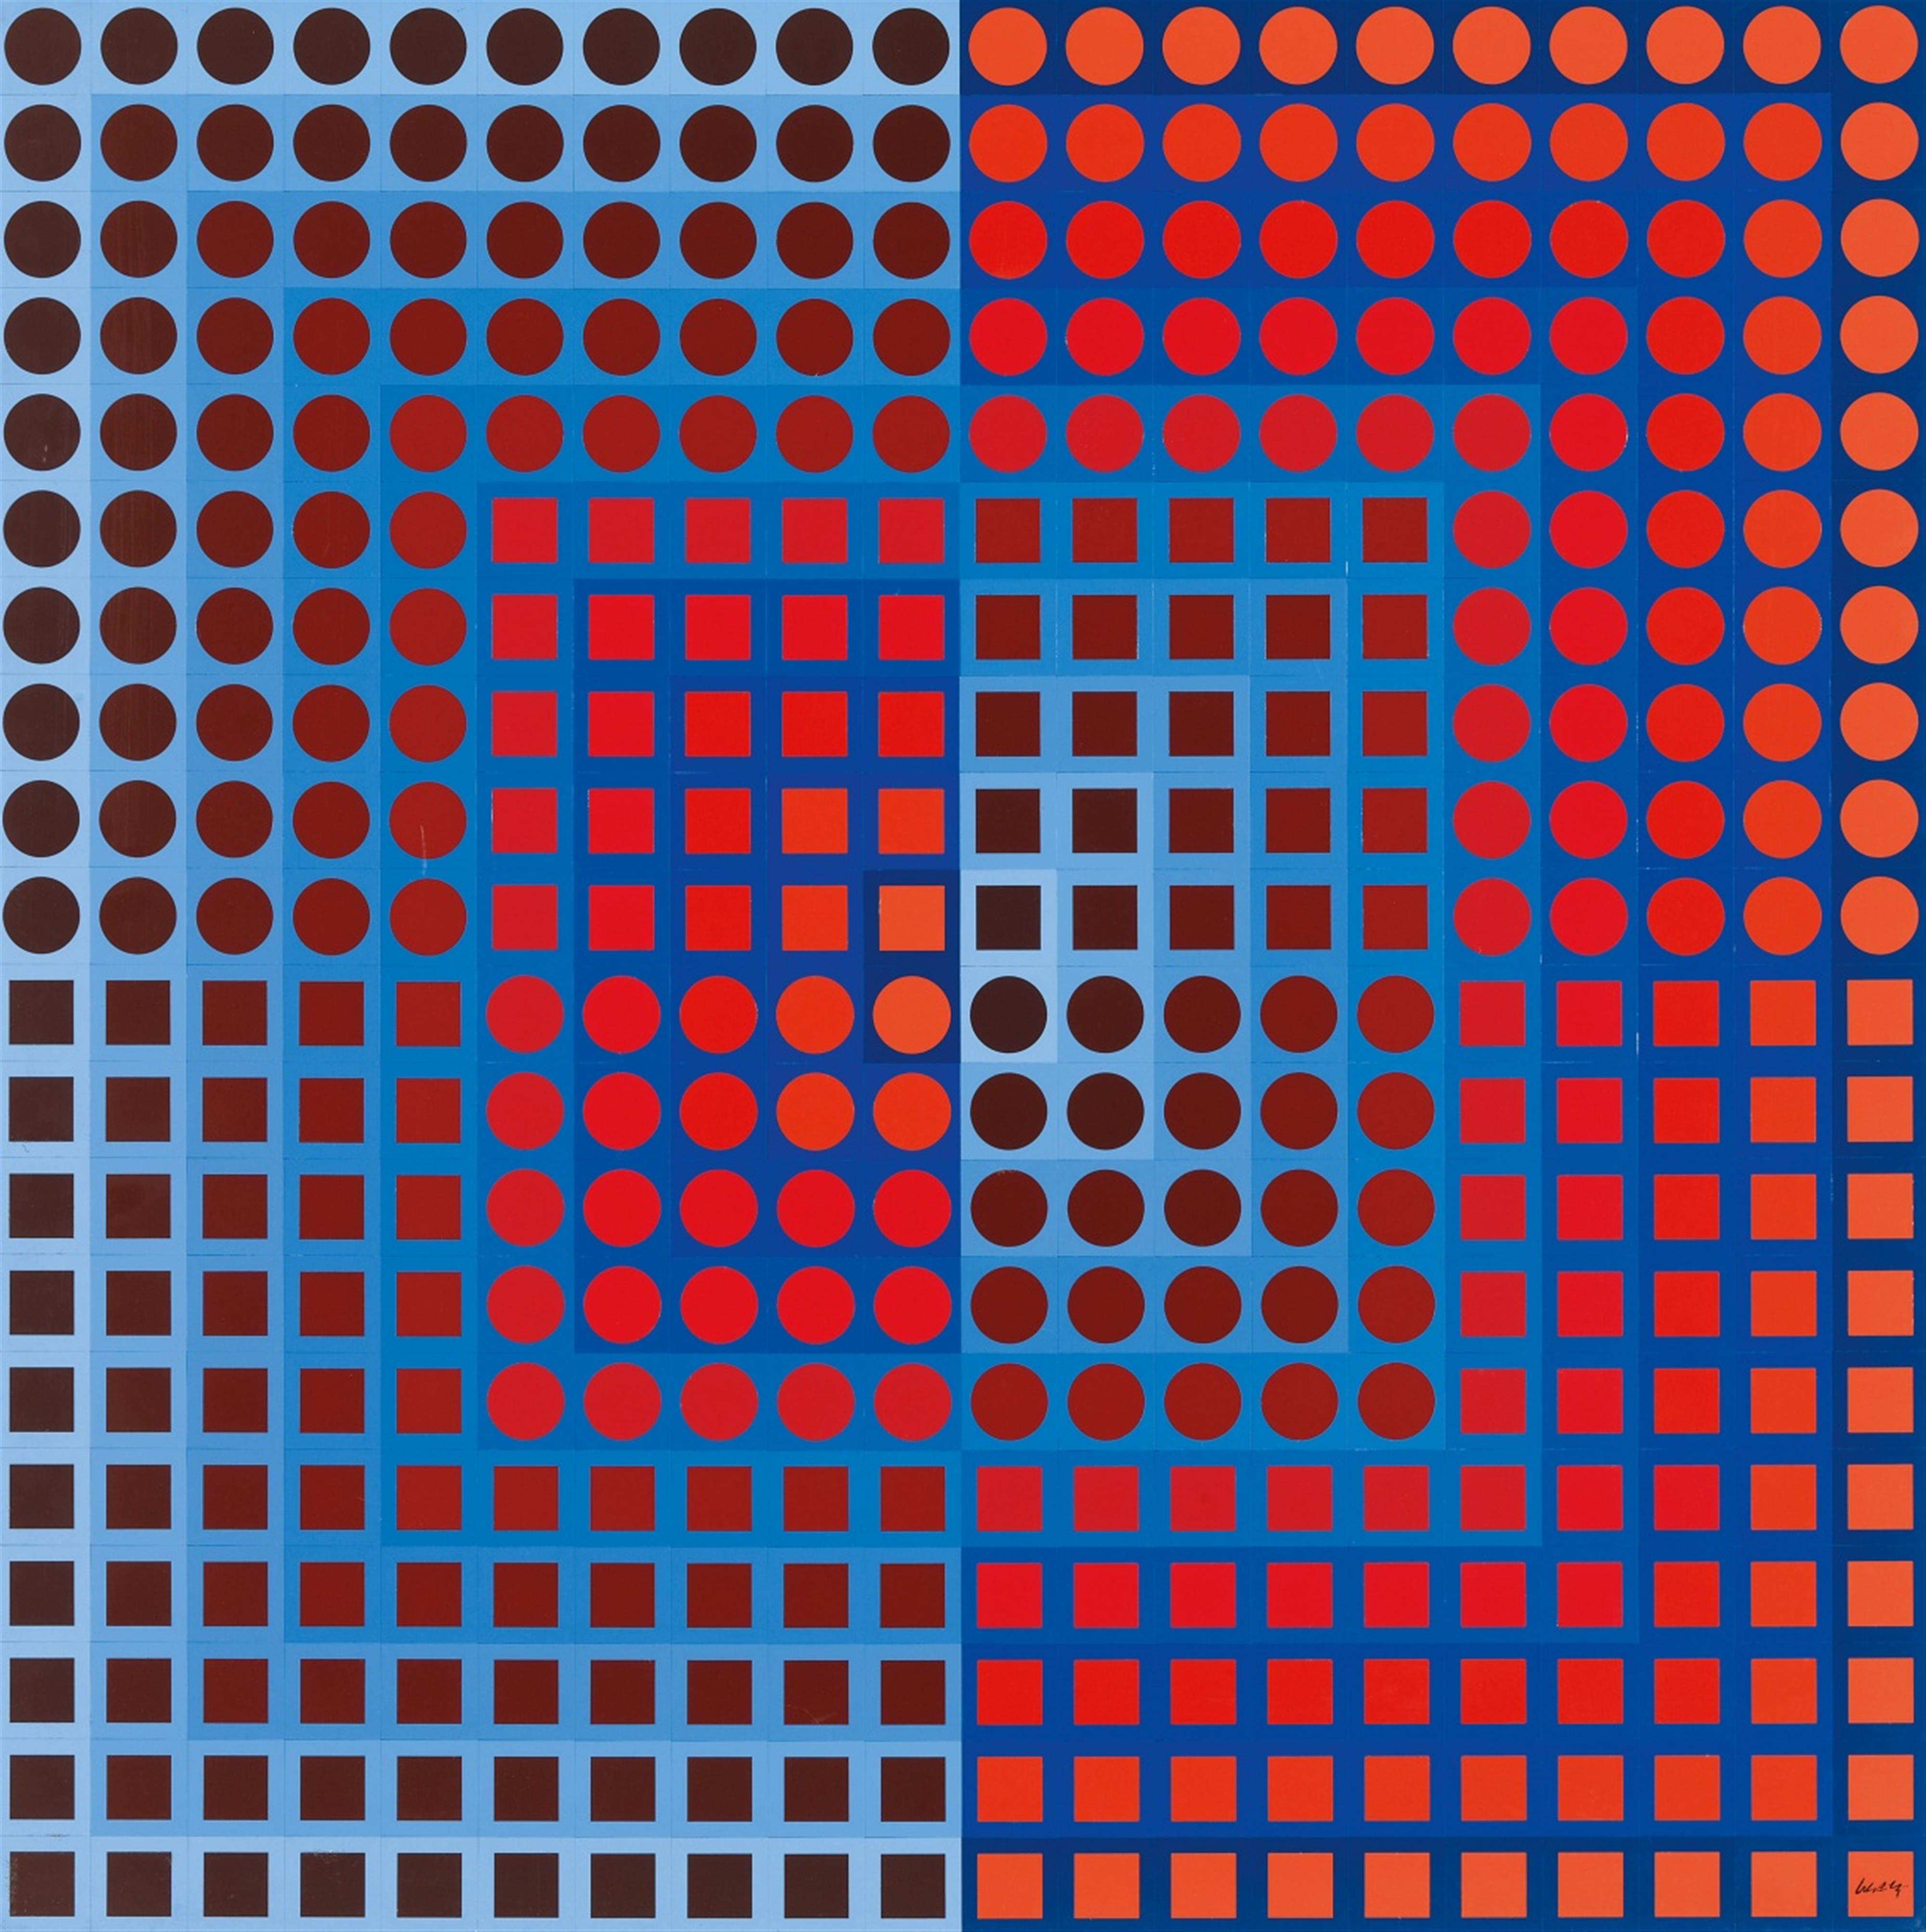 Victor Vasarely - Zoeld I (Blue/Red) - image-1